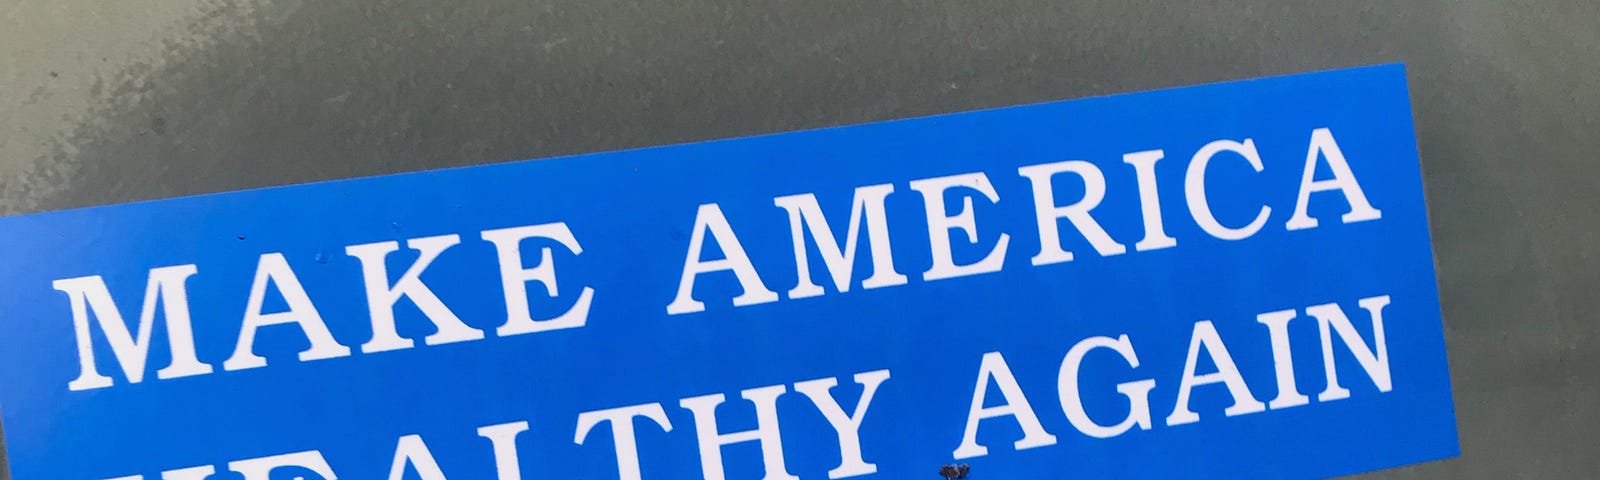 a blue bumper sticker with white letters reading “make america healthy again”